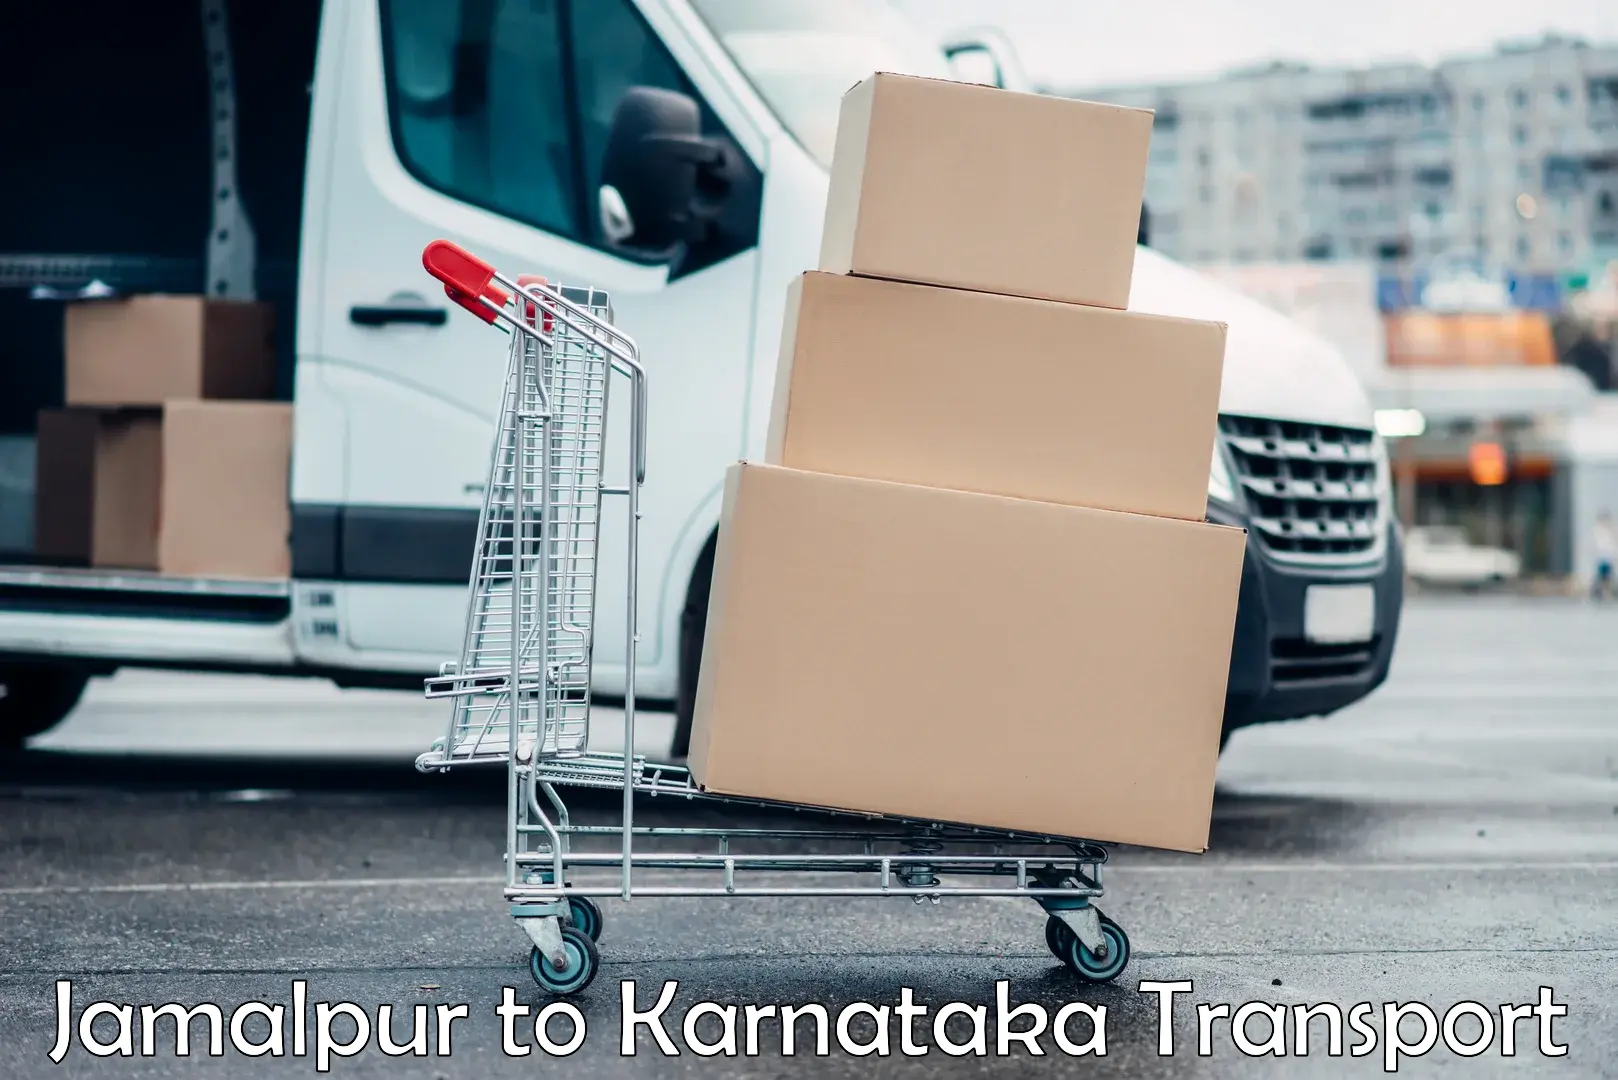 Commercial transport service Jamalpur to Manipal